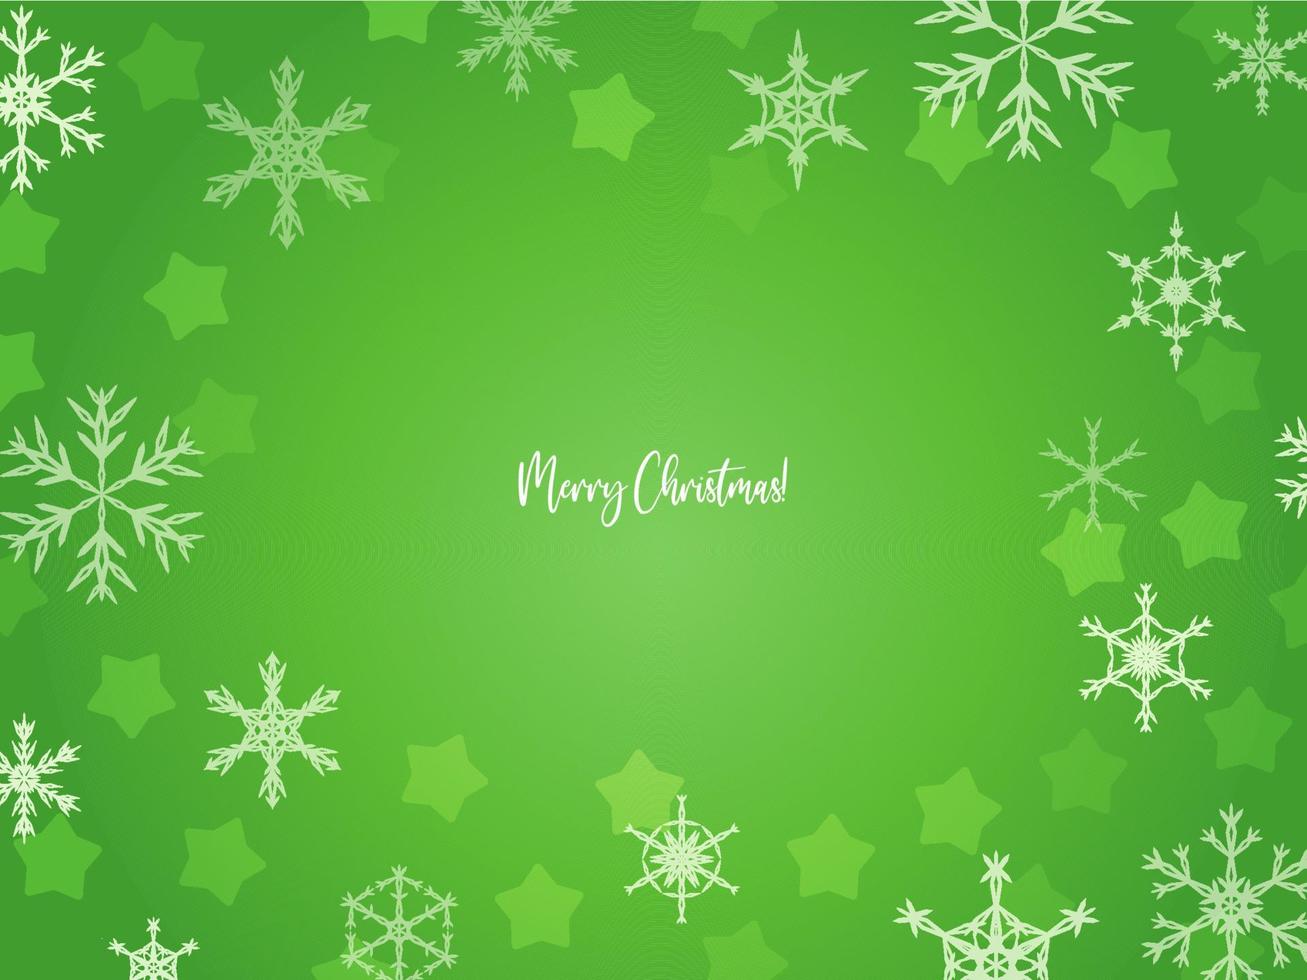 Abstract blurry green christmas background with snowflakes and stars. vector